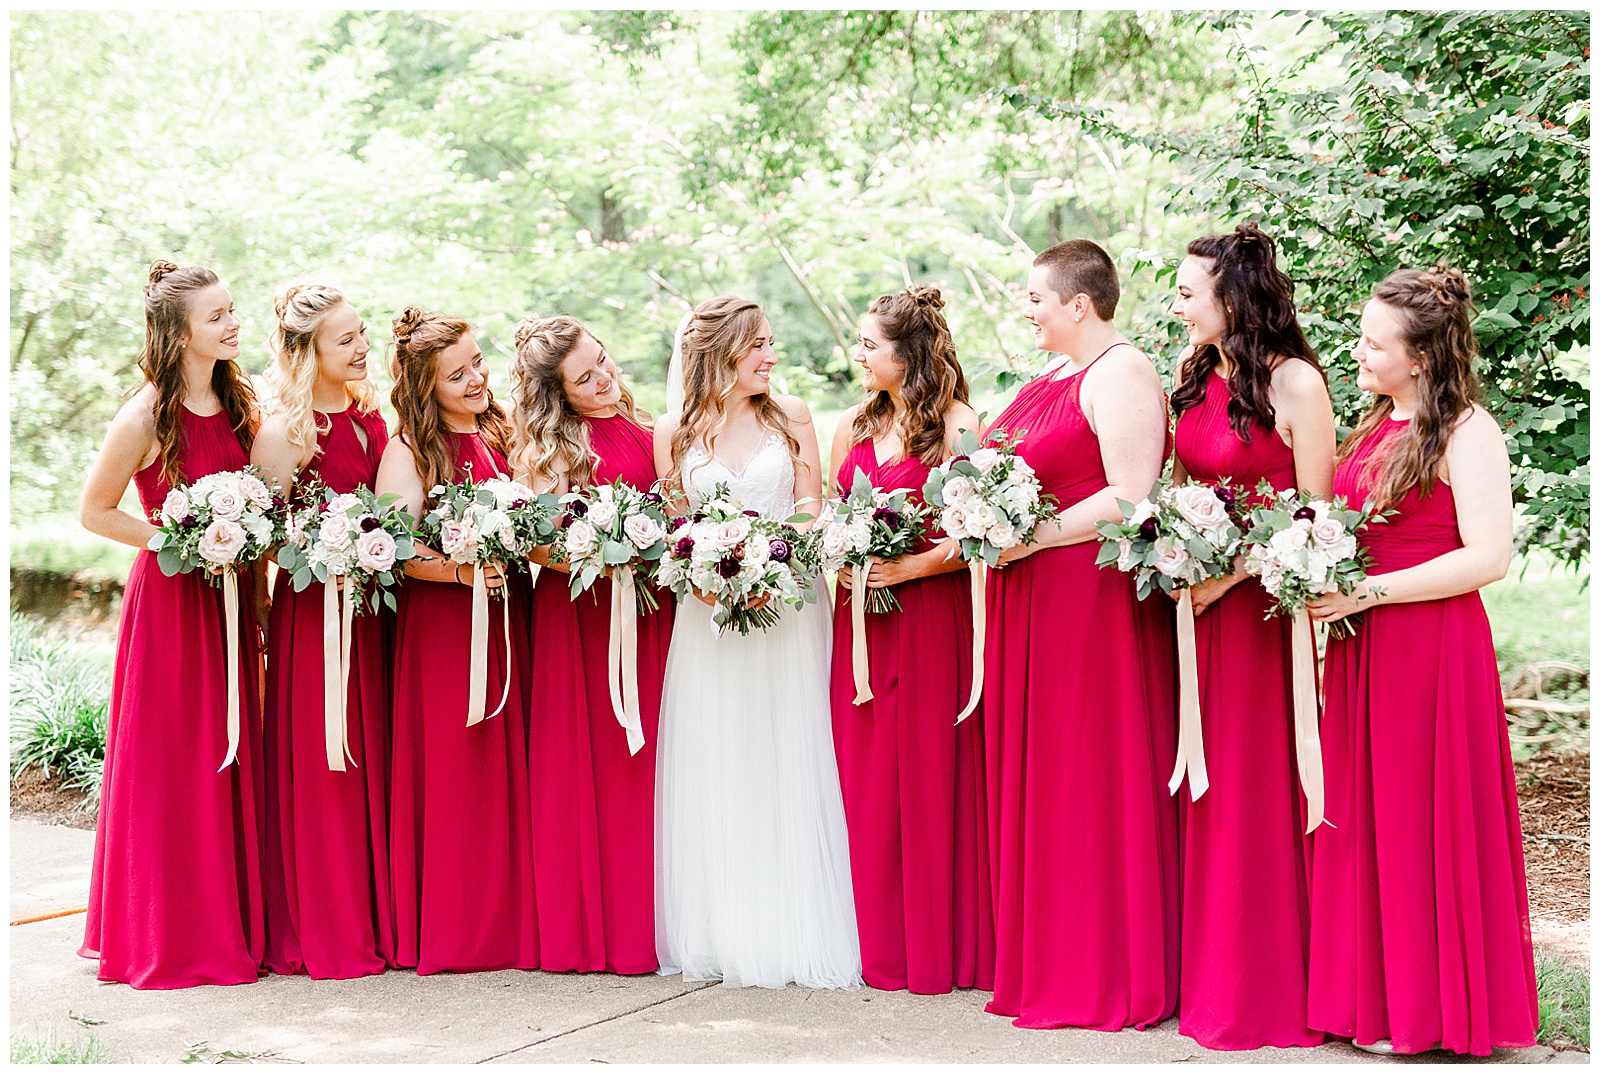 Matching Red Themed Bridesmaid Dresses from Elegant Modern Red and Navy Blue Themed Wedding in Charlotte, NC | check out the full wedding at KevynDixonPhoto.com